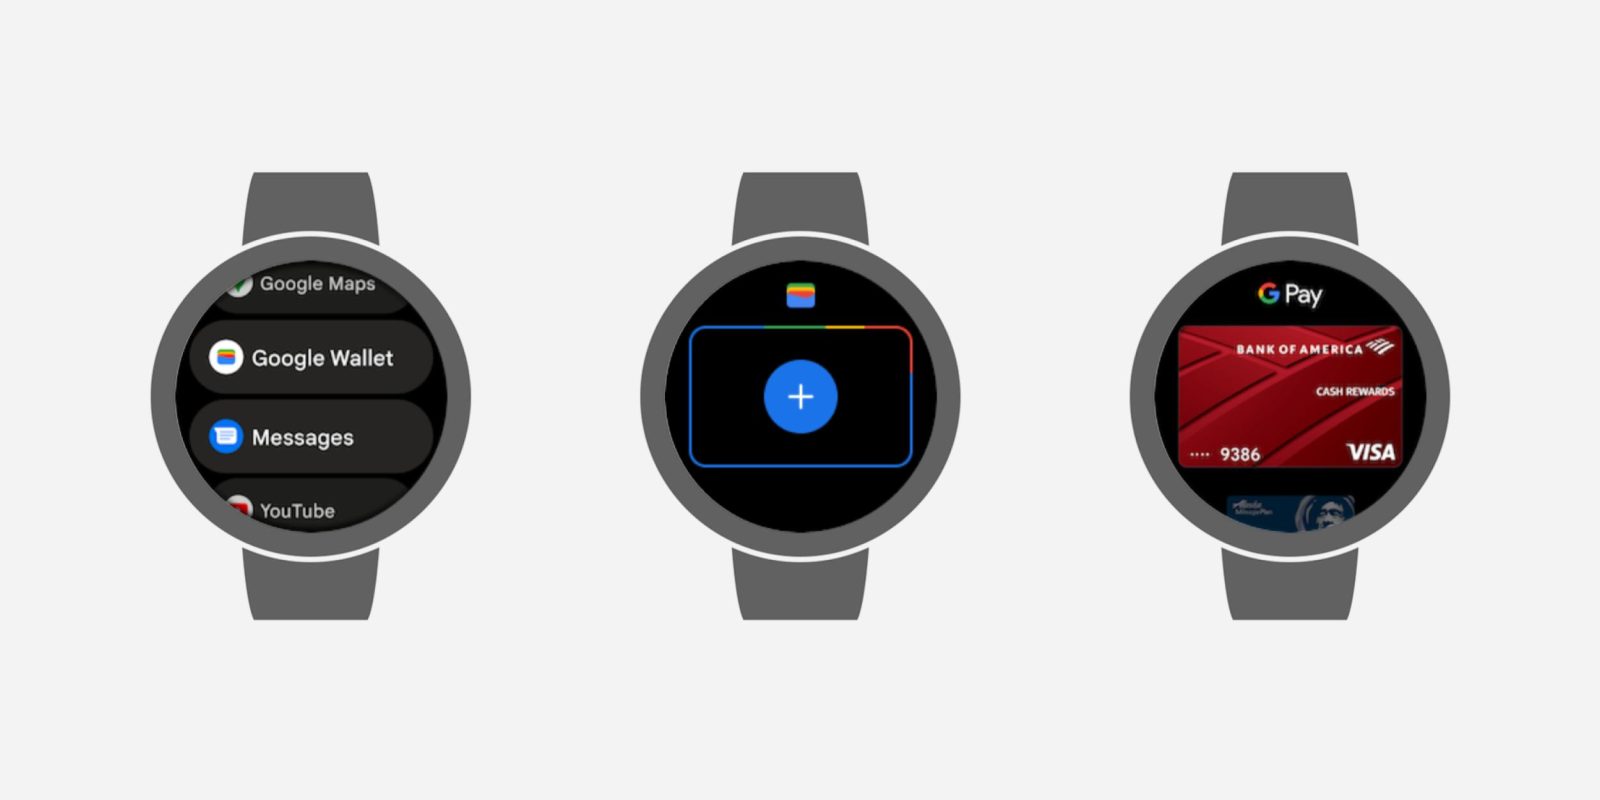 Google Wallet on Wear OS asking for PIN before tap-to-pay is just a bug